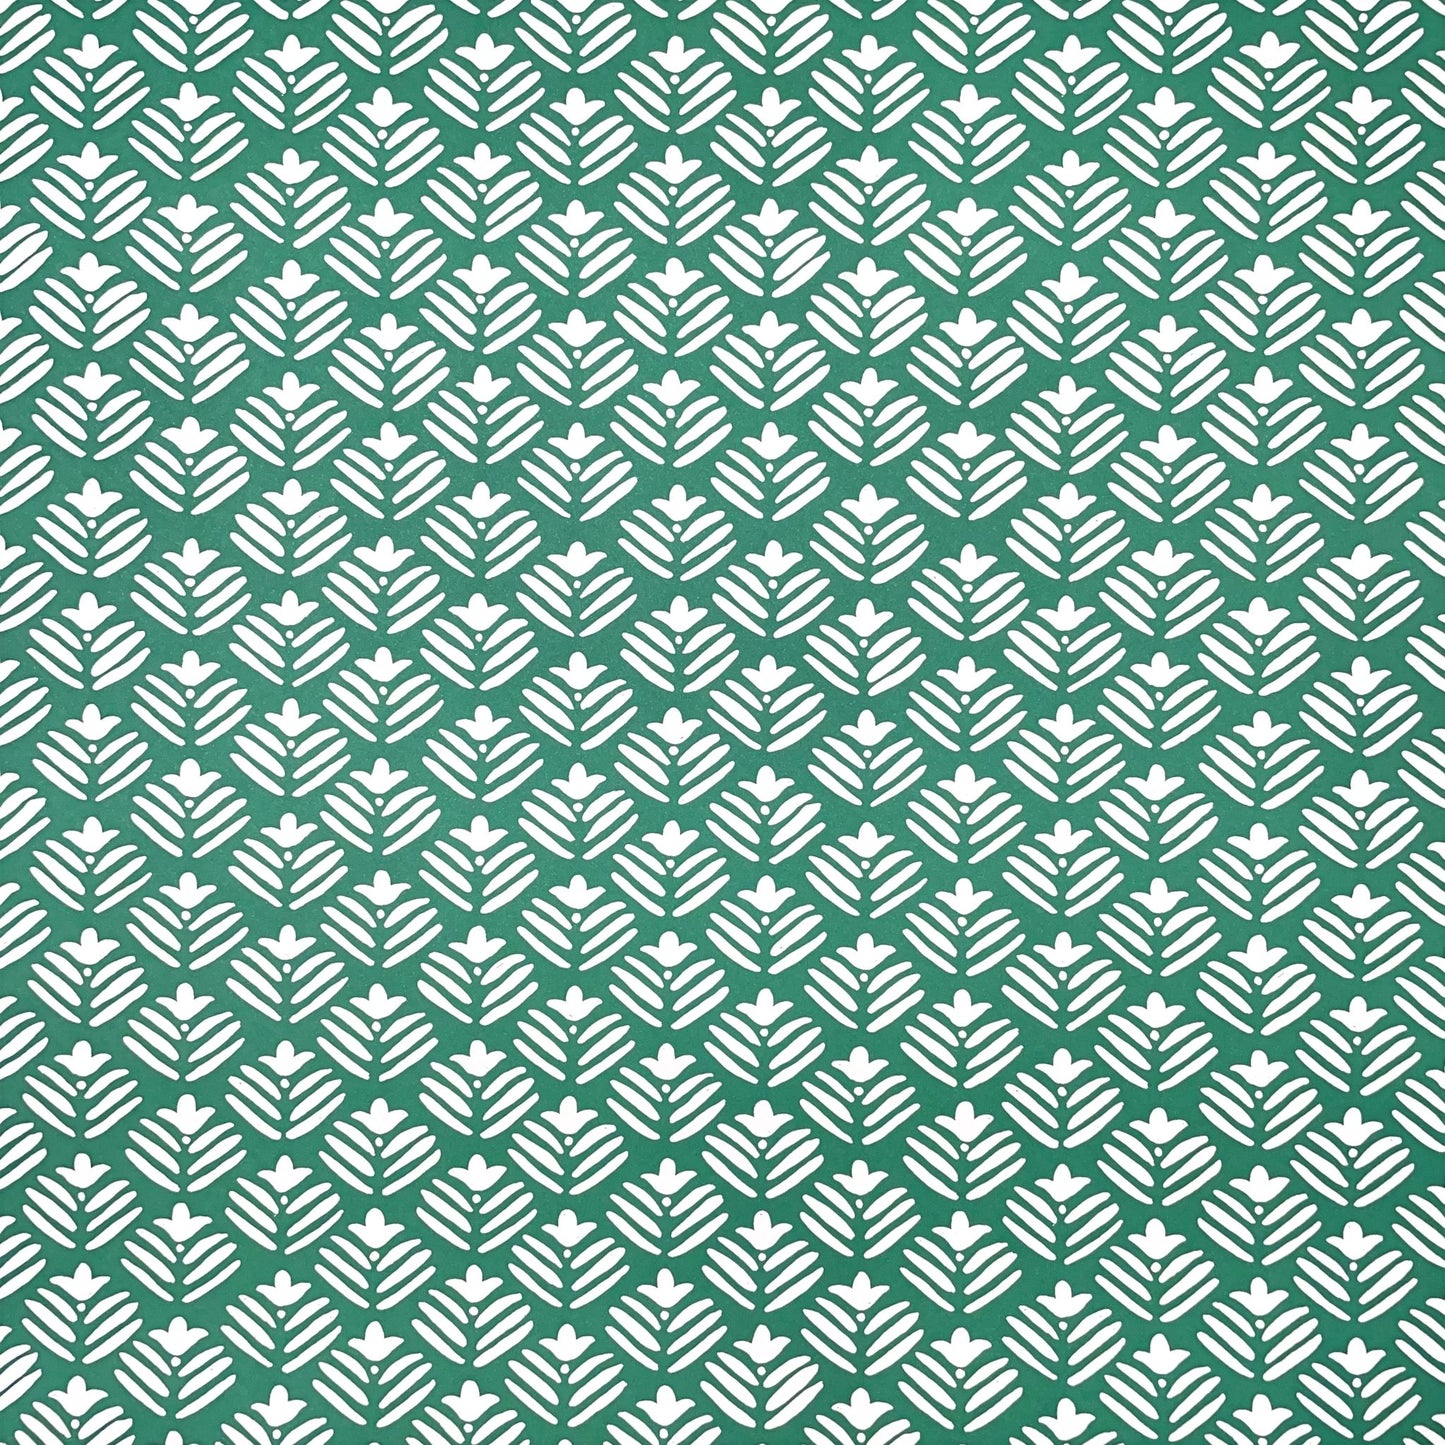 wrapping paper with emerald green backdrop and a white flower repeat pattern by Heather Evelyn